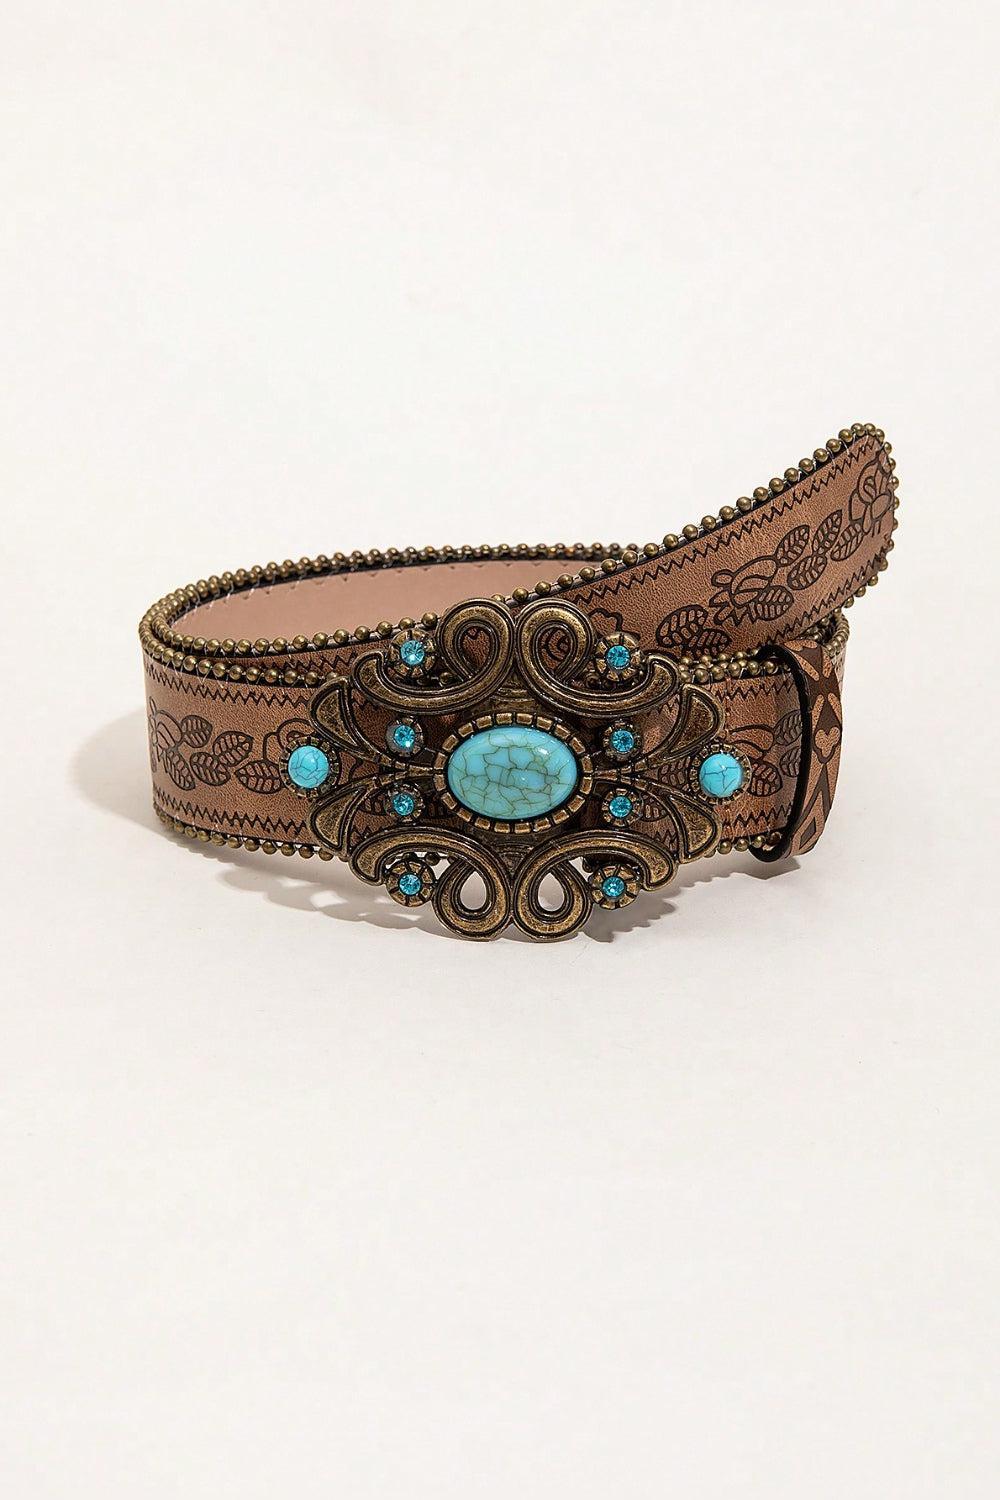 a belt with a turquoise stone in the center